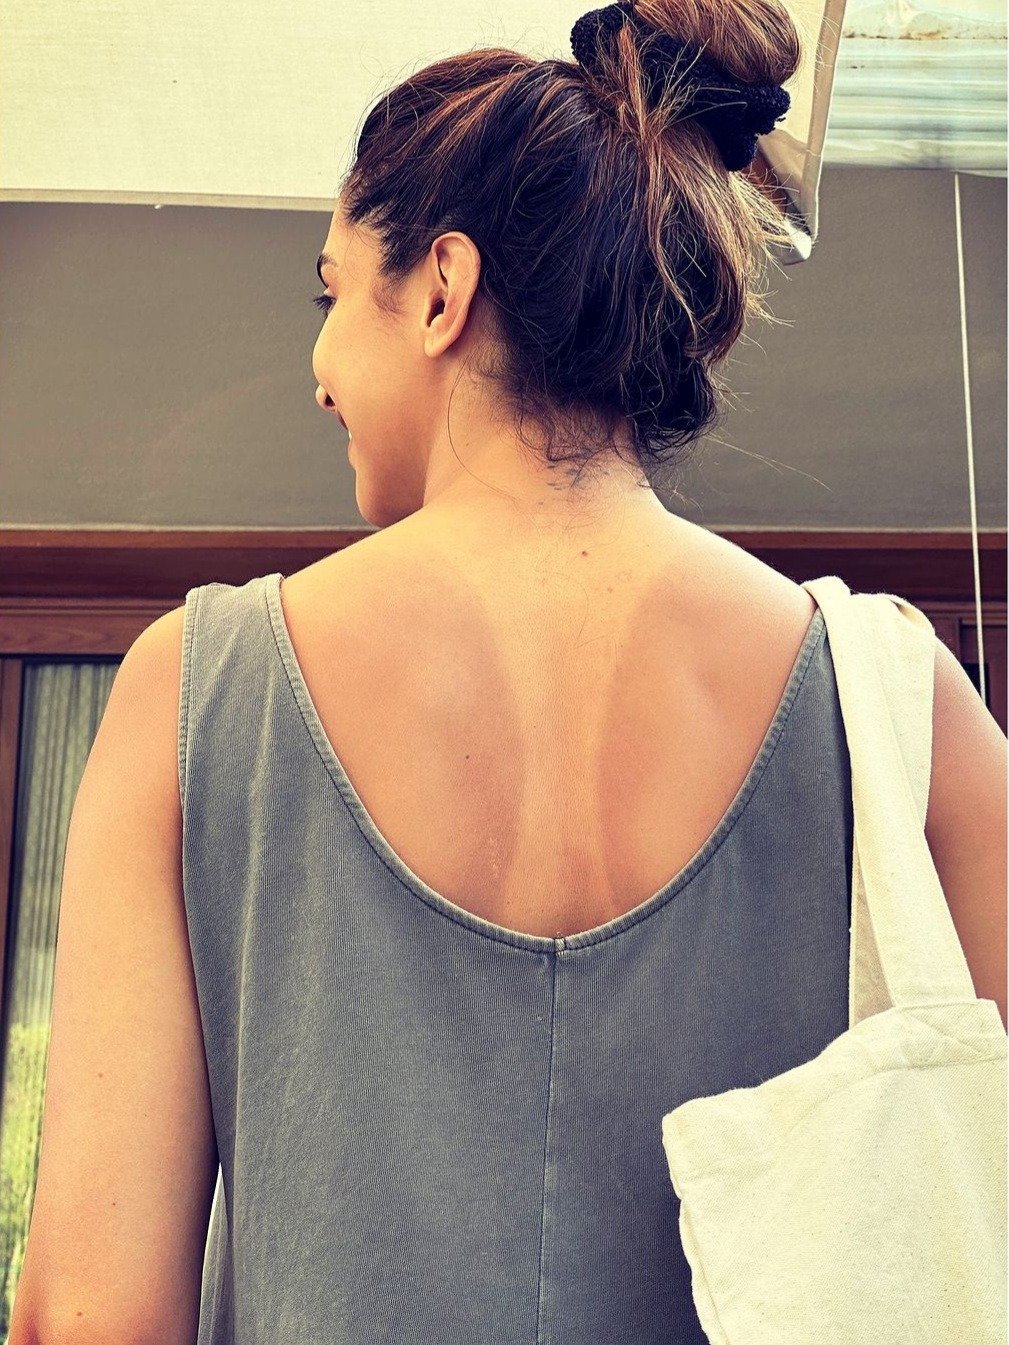 Burns on Deepika's back? What happened to the mother-to-be?